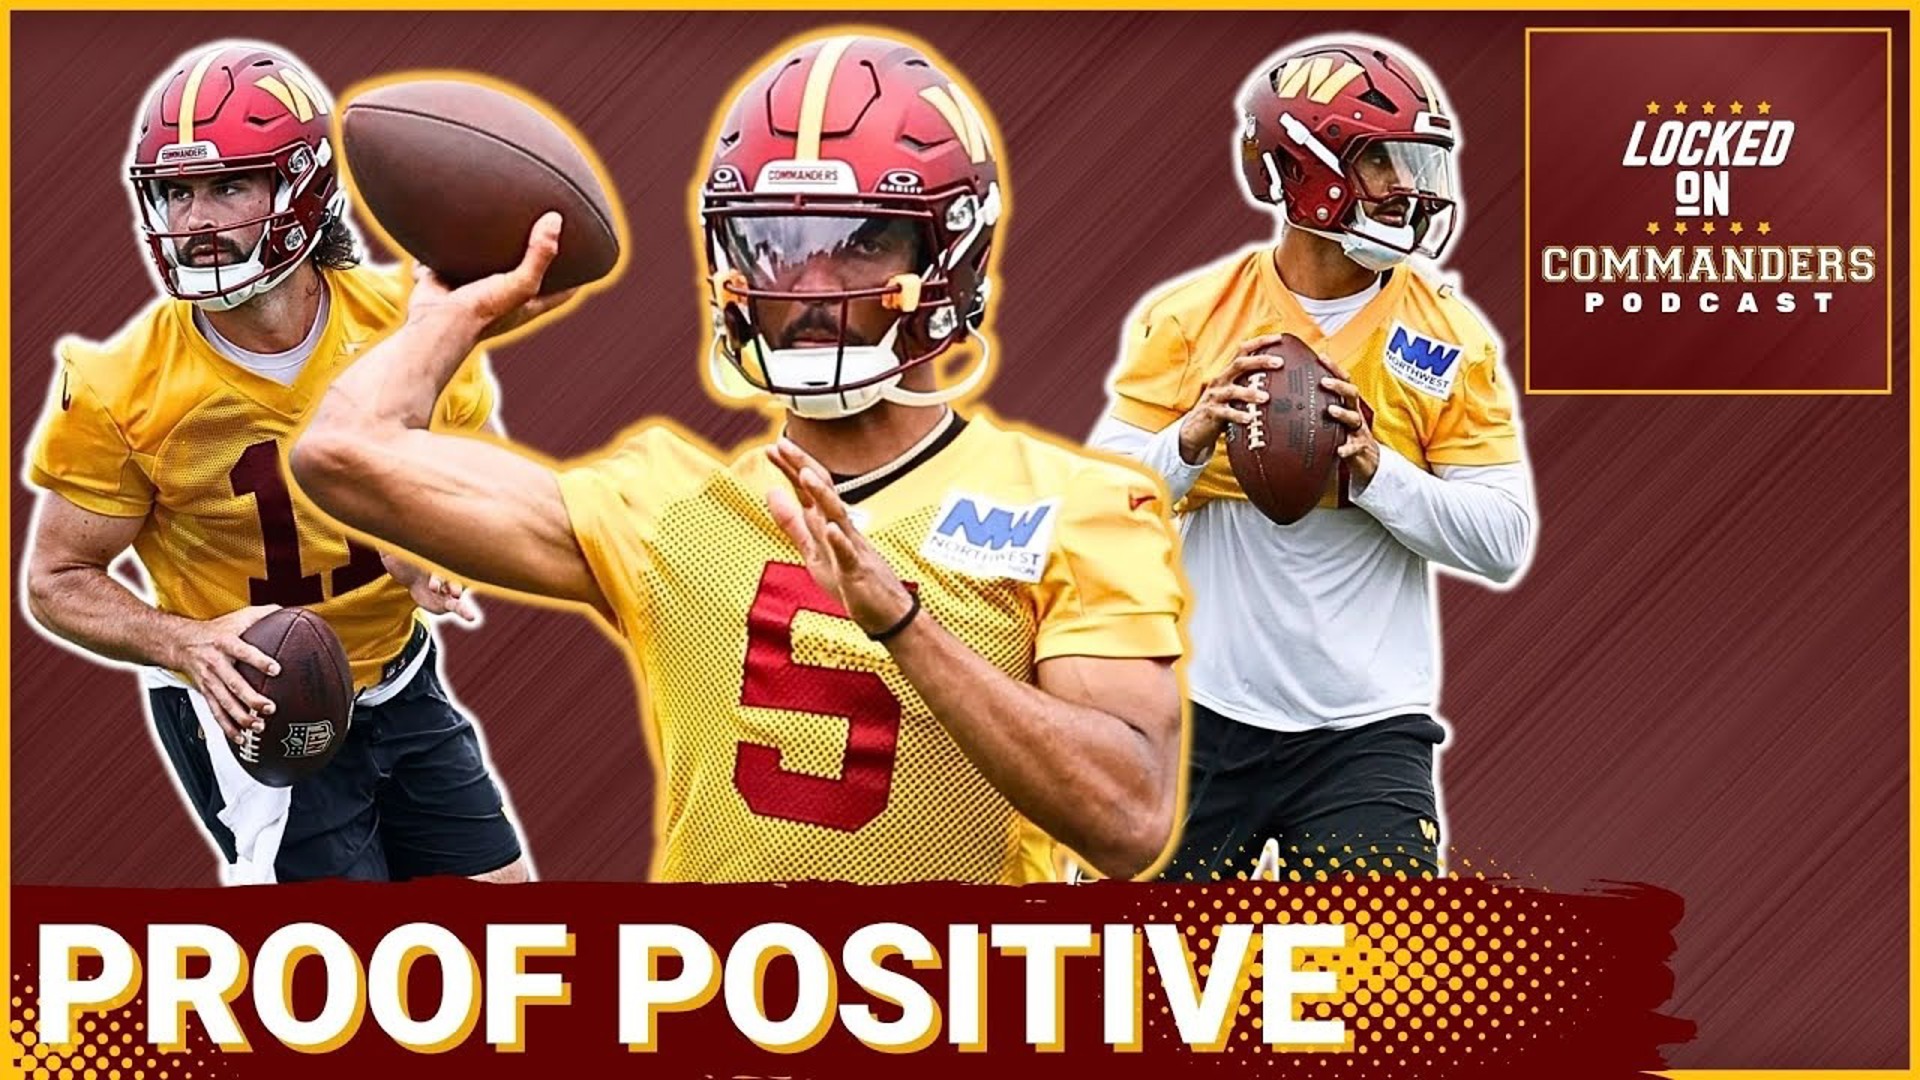 Washington Commanders quarterback Jayden Daniels is already proving to be the top player in the room as we reflect on what we've learned so far.